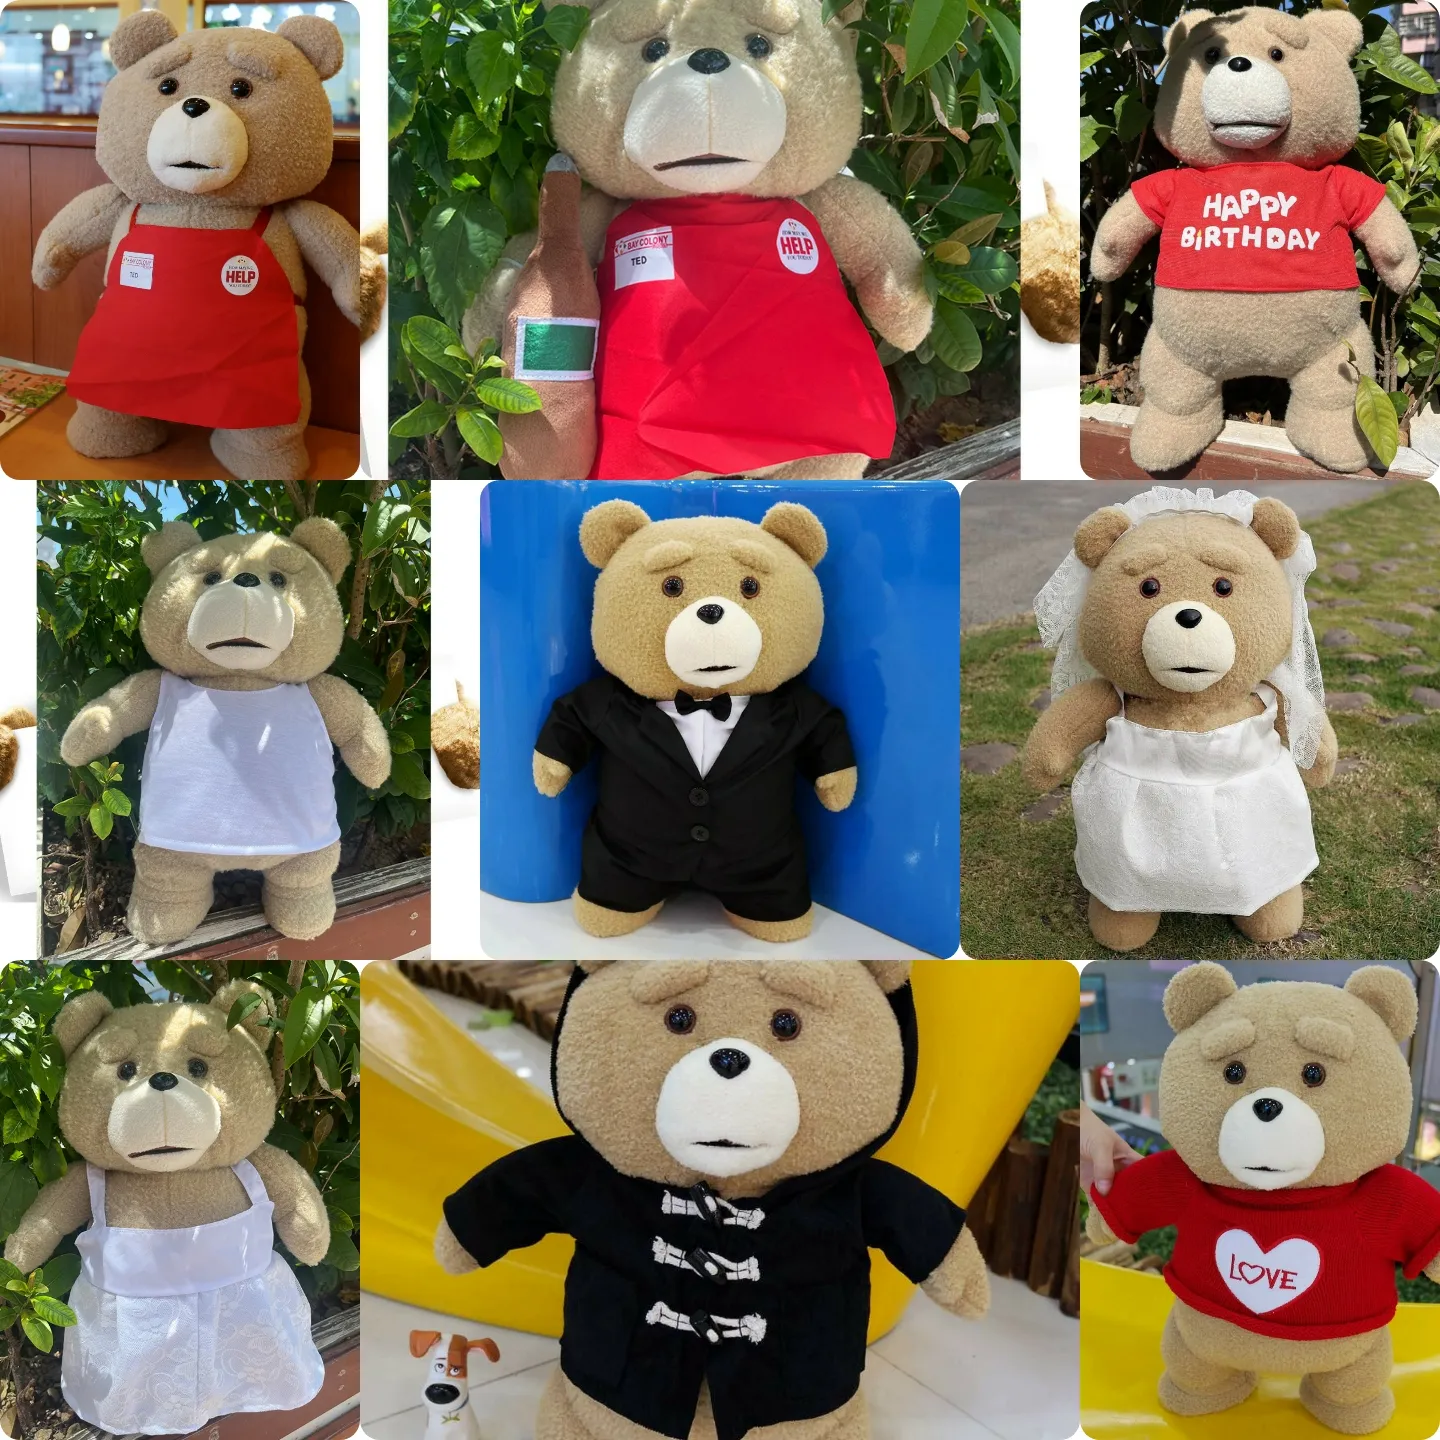 Wholesale 43cm bitter face Teddy bear plush toy children's game playmate holiday gift bedroom decoration